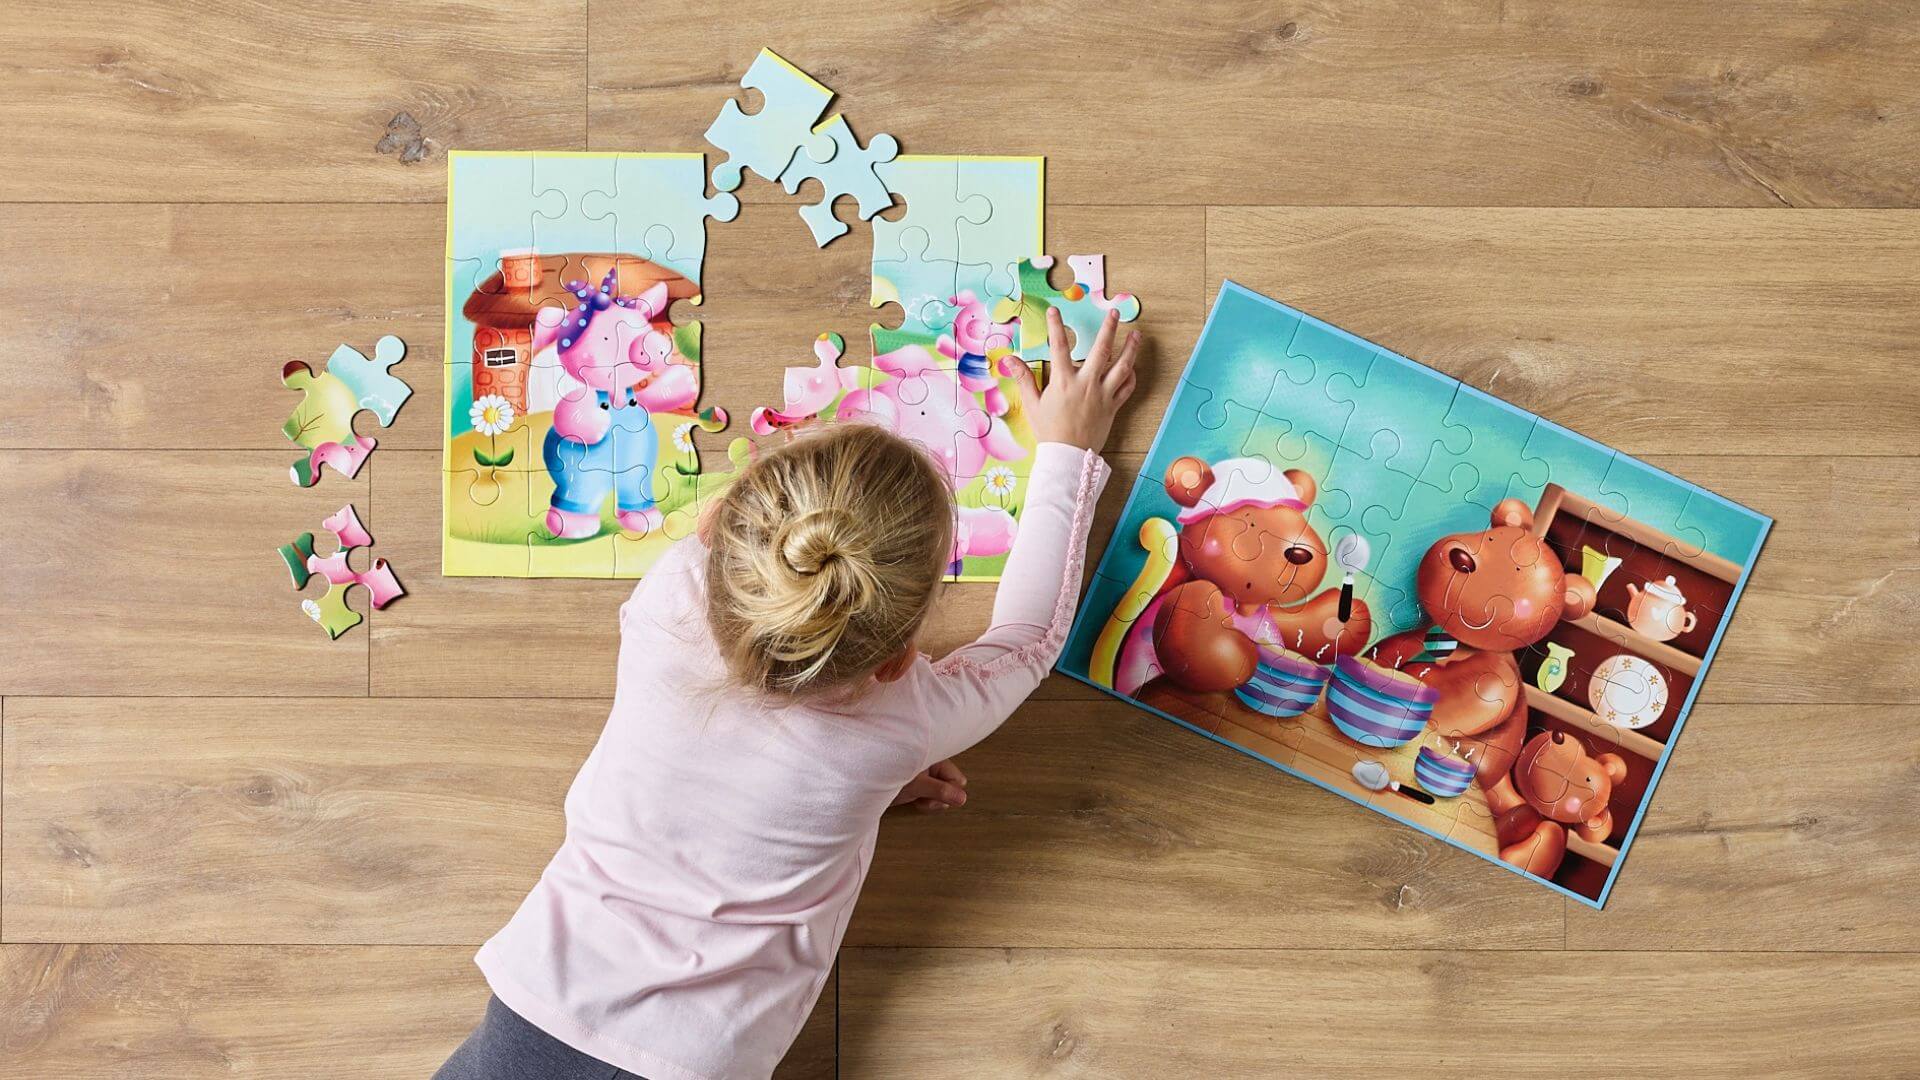 Entertaining Games And Puzzles For Kids of All Ages